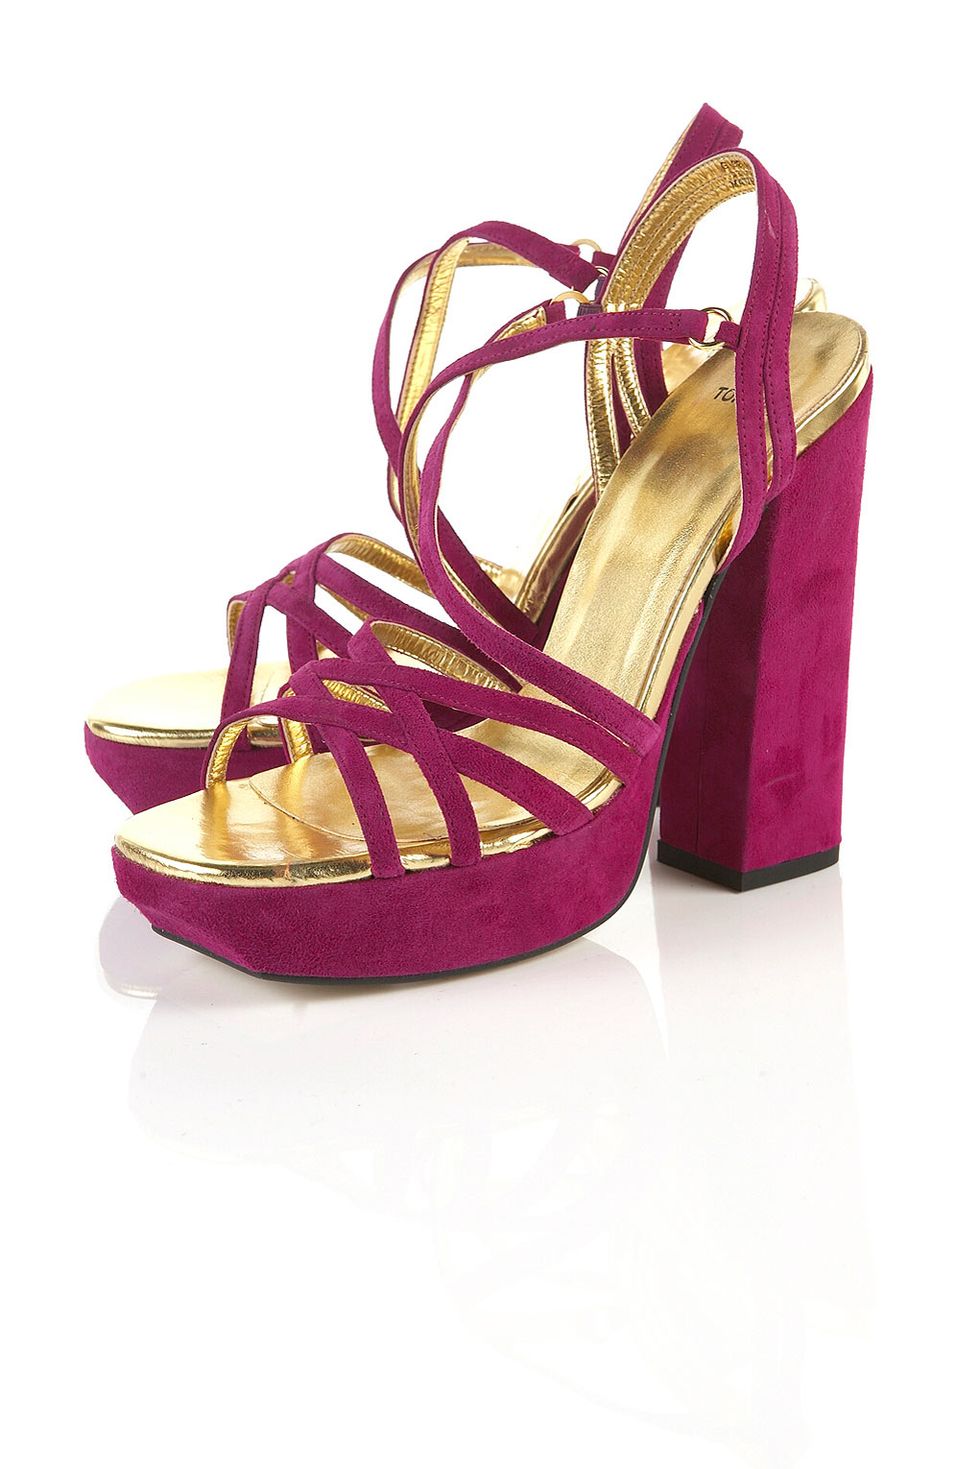 <p>Block heels are the shoe shape du jour and these suede magenta puppies are the pair to wear with denim, dresses and well... everything!</p>

<p>£70,<a href="http://www.topshop.com/webapp/wcs/stores/servlet/ProductDisplay?beginIndex=0&viewAllFlag=&catalogId=33057&storeId=12556&productId=1876873&langId=-1&categoryId=&parent_category_rn="> topshop.com </a></p>